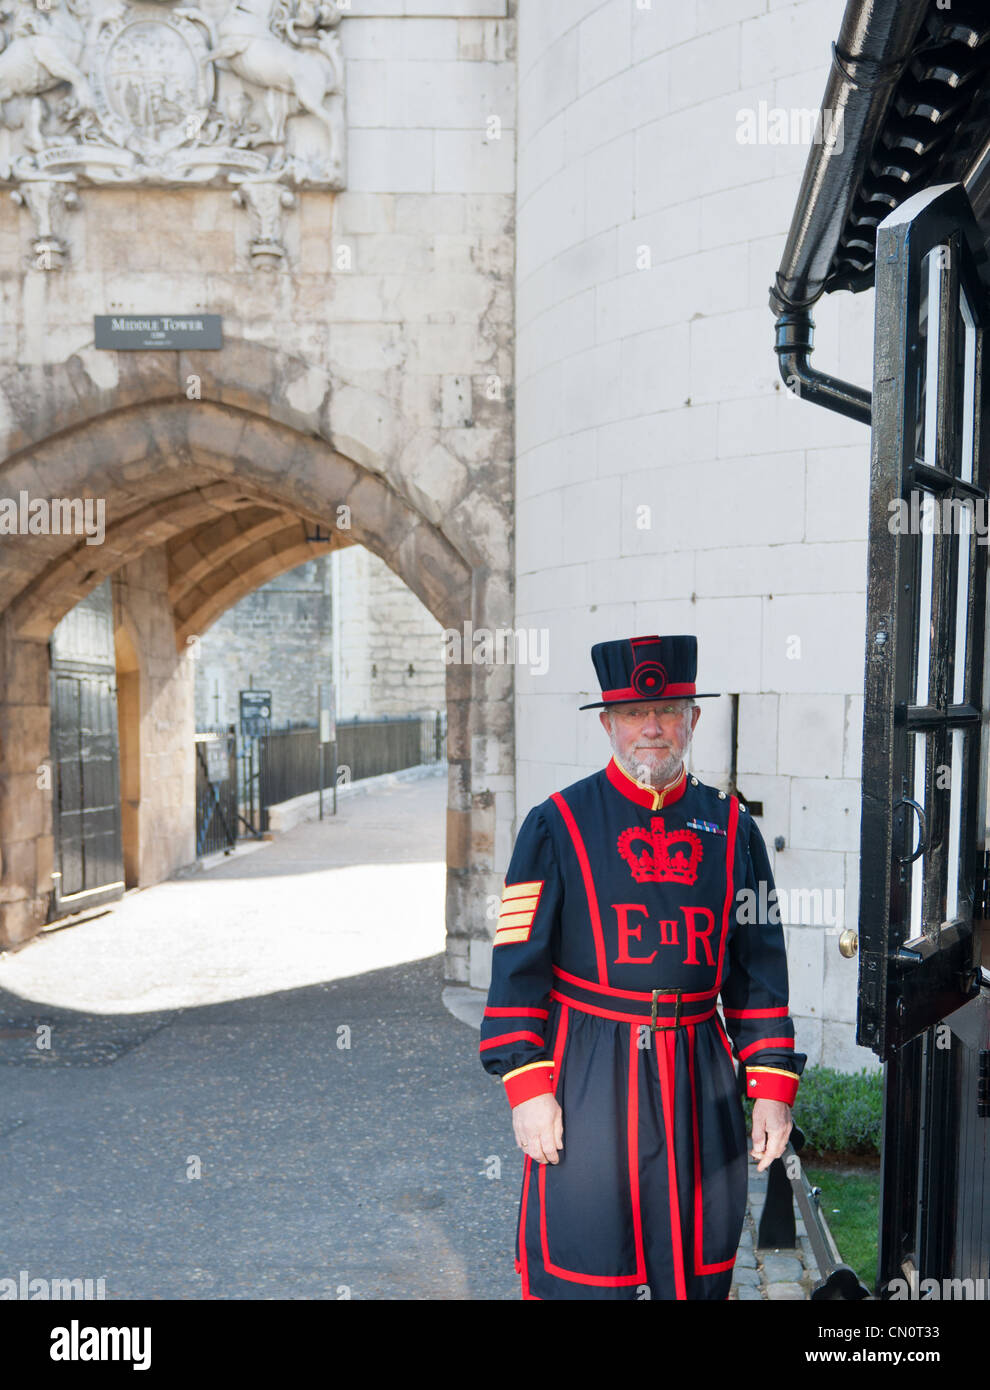 Yeoman guard or Beefeater at the gates of the Tower of London, England. Stock Photo